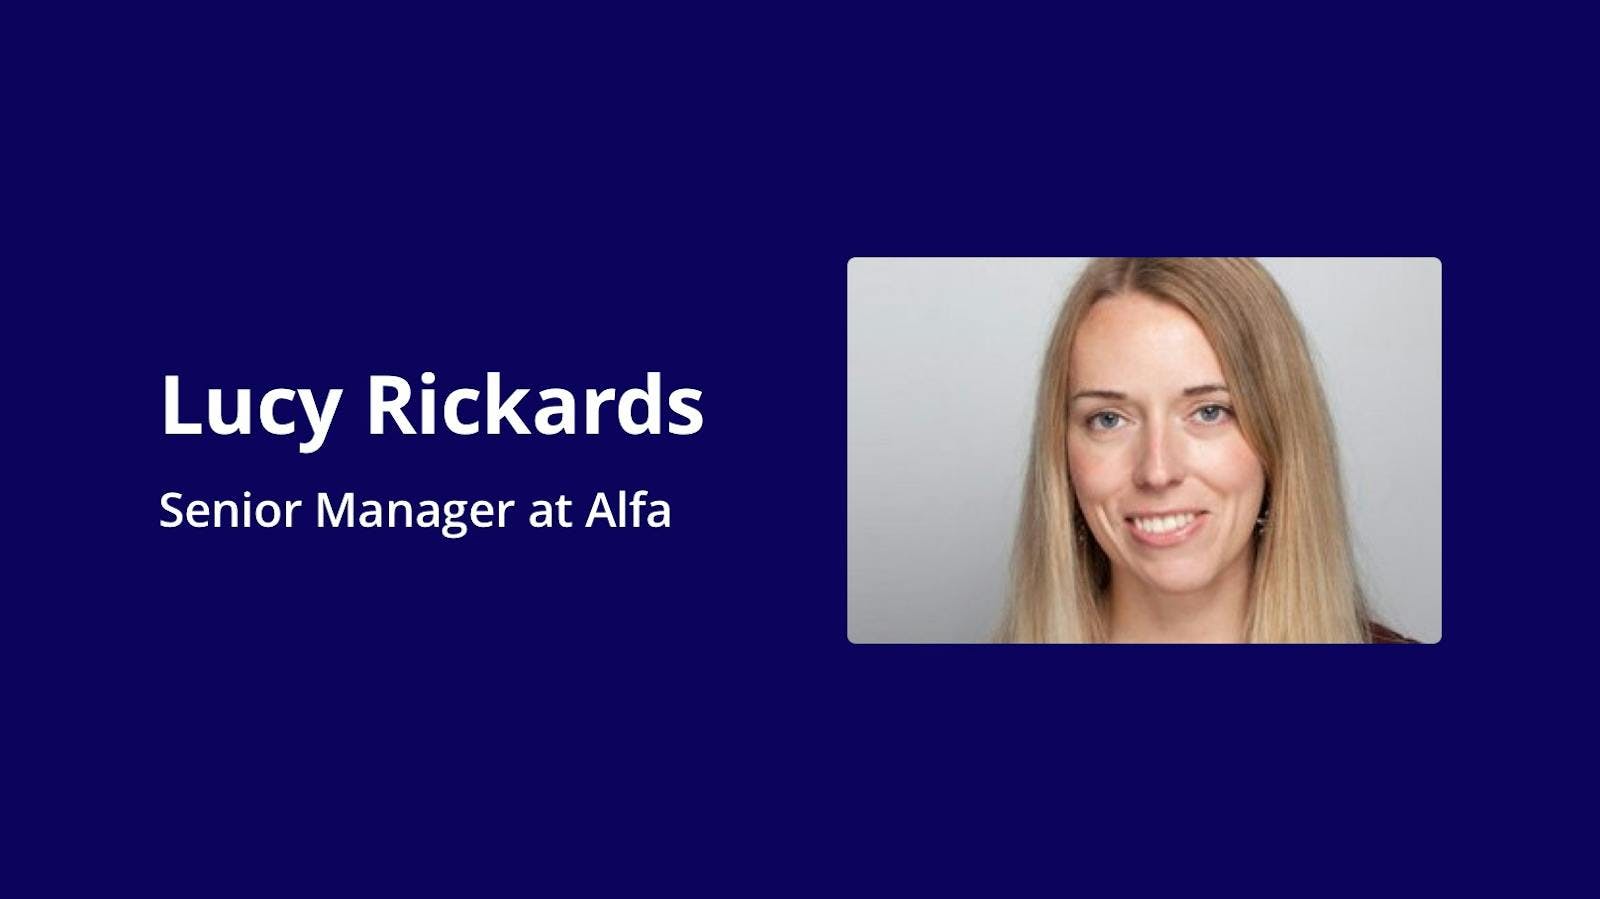 Portrait of Lucy Richards, Senior Manager at Alfa